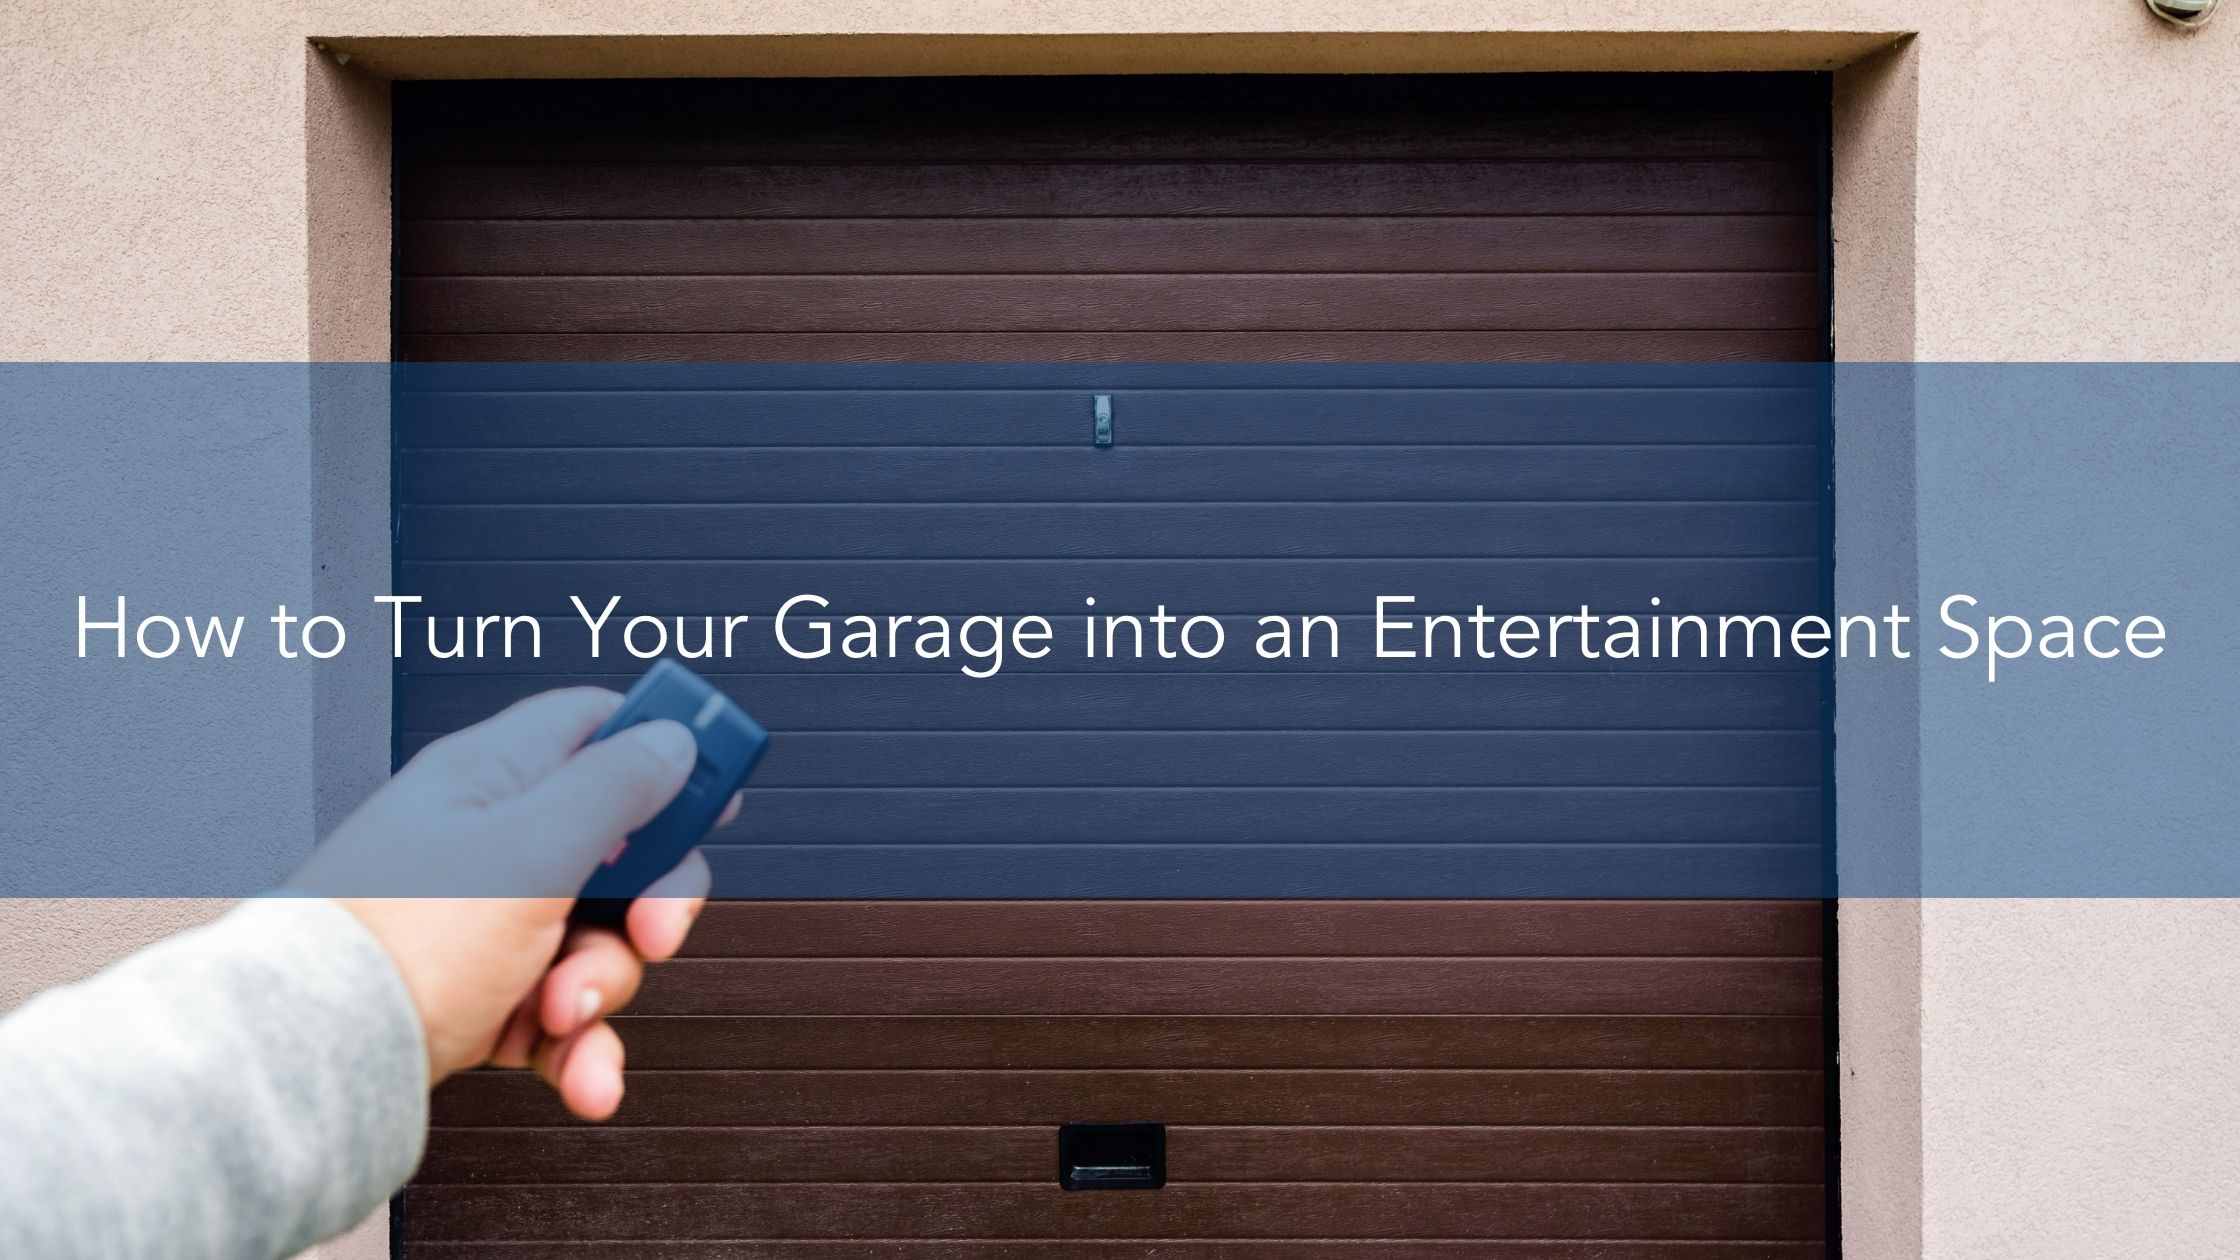 https://handymanconnection.com/wp-content/uploads/2022/07/How-to-Turn-Your-Garage-into-an-Entertainment-Space.jpg